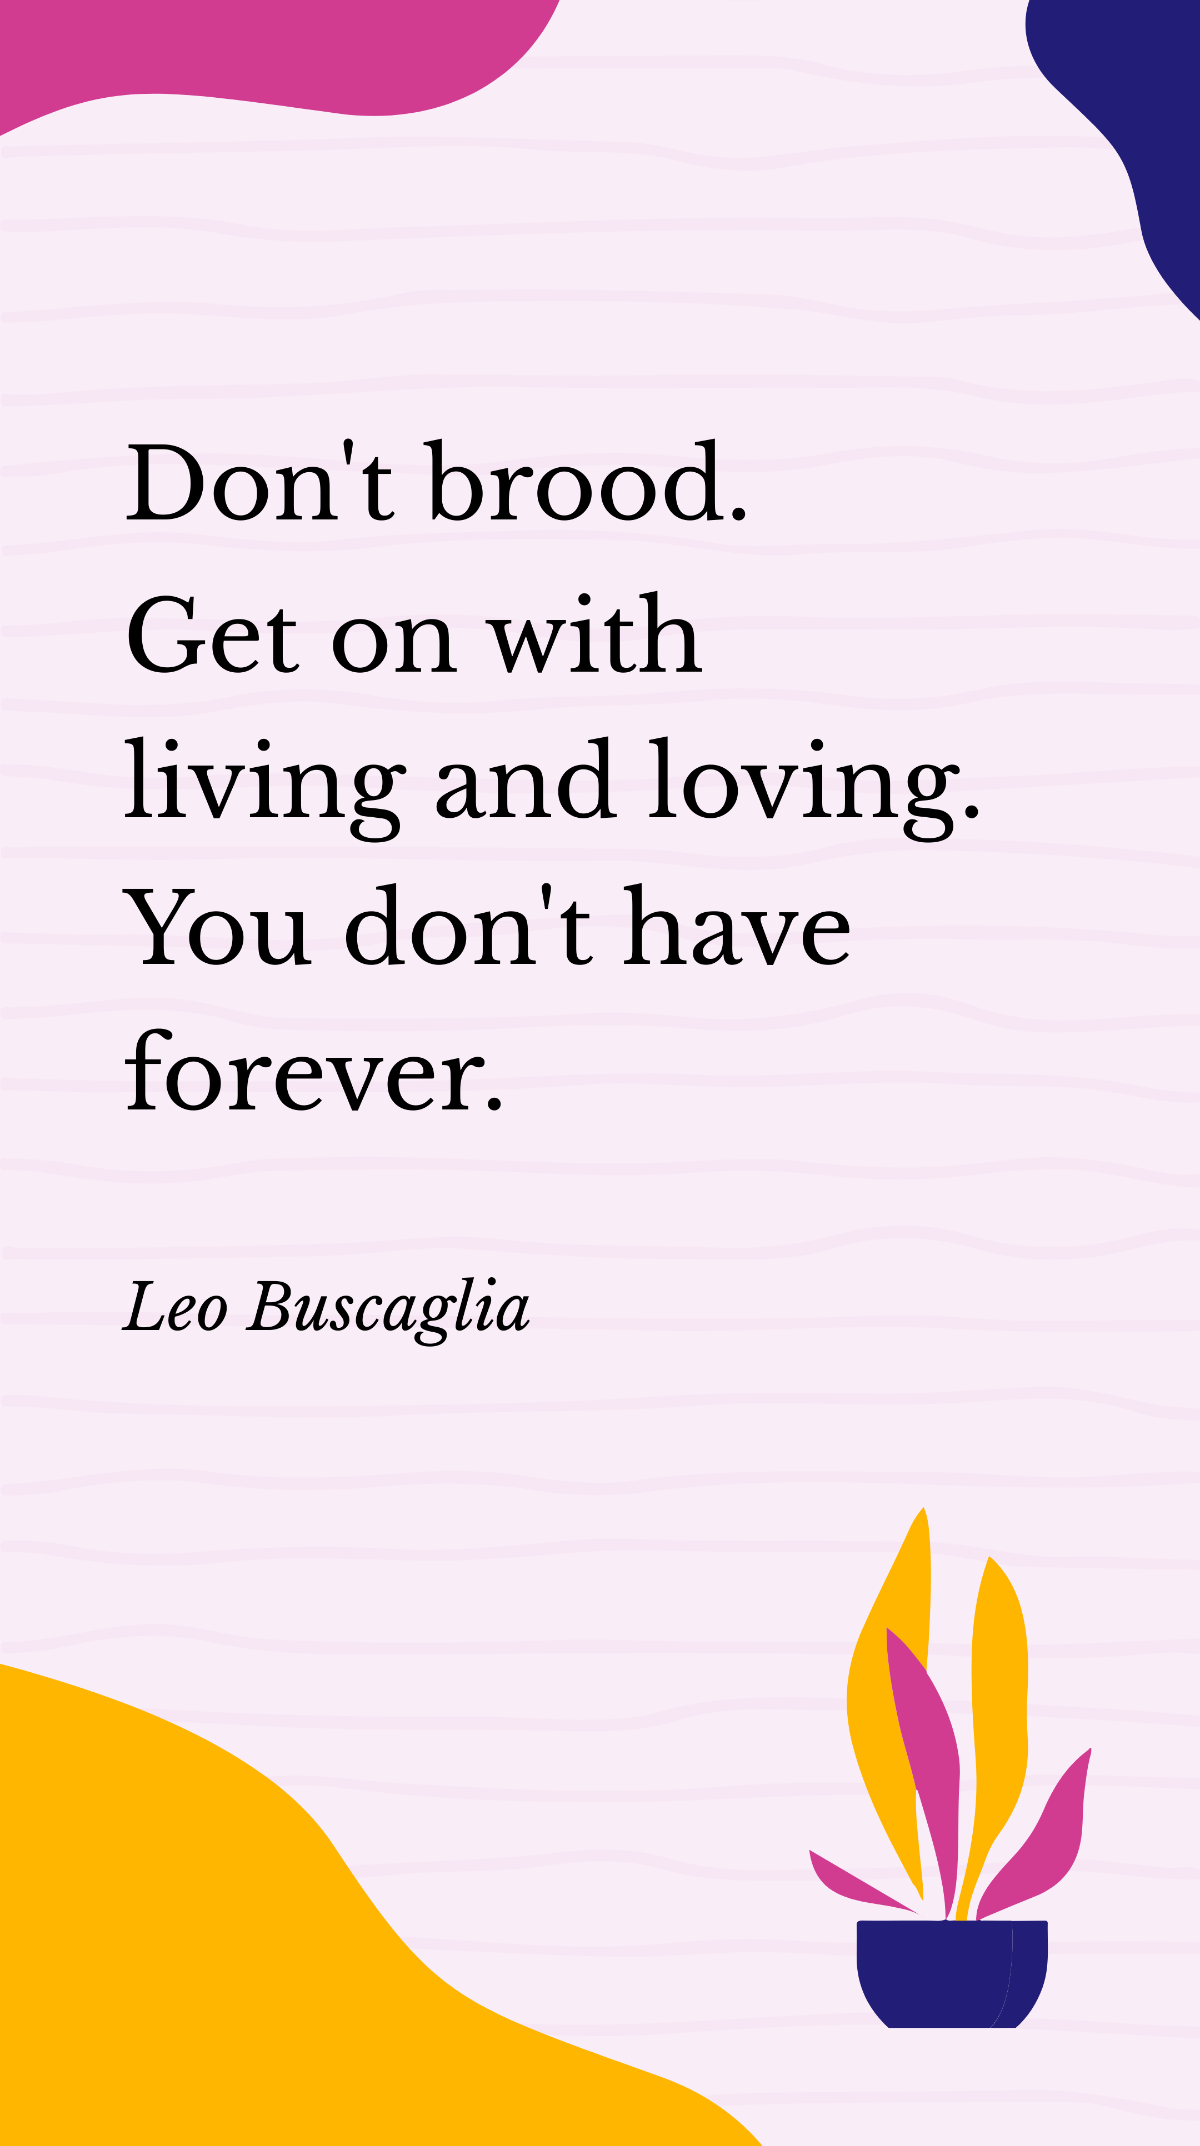 Leo Buscaglia - Don't brood. Get on with living and loving. You don't have forever. Template